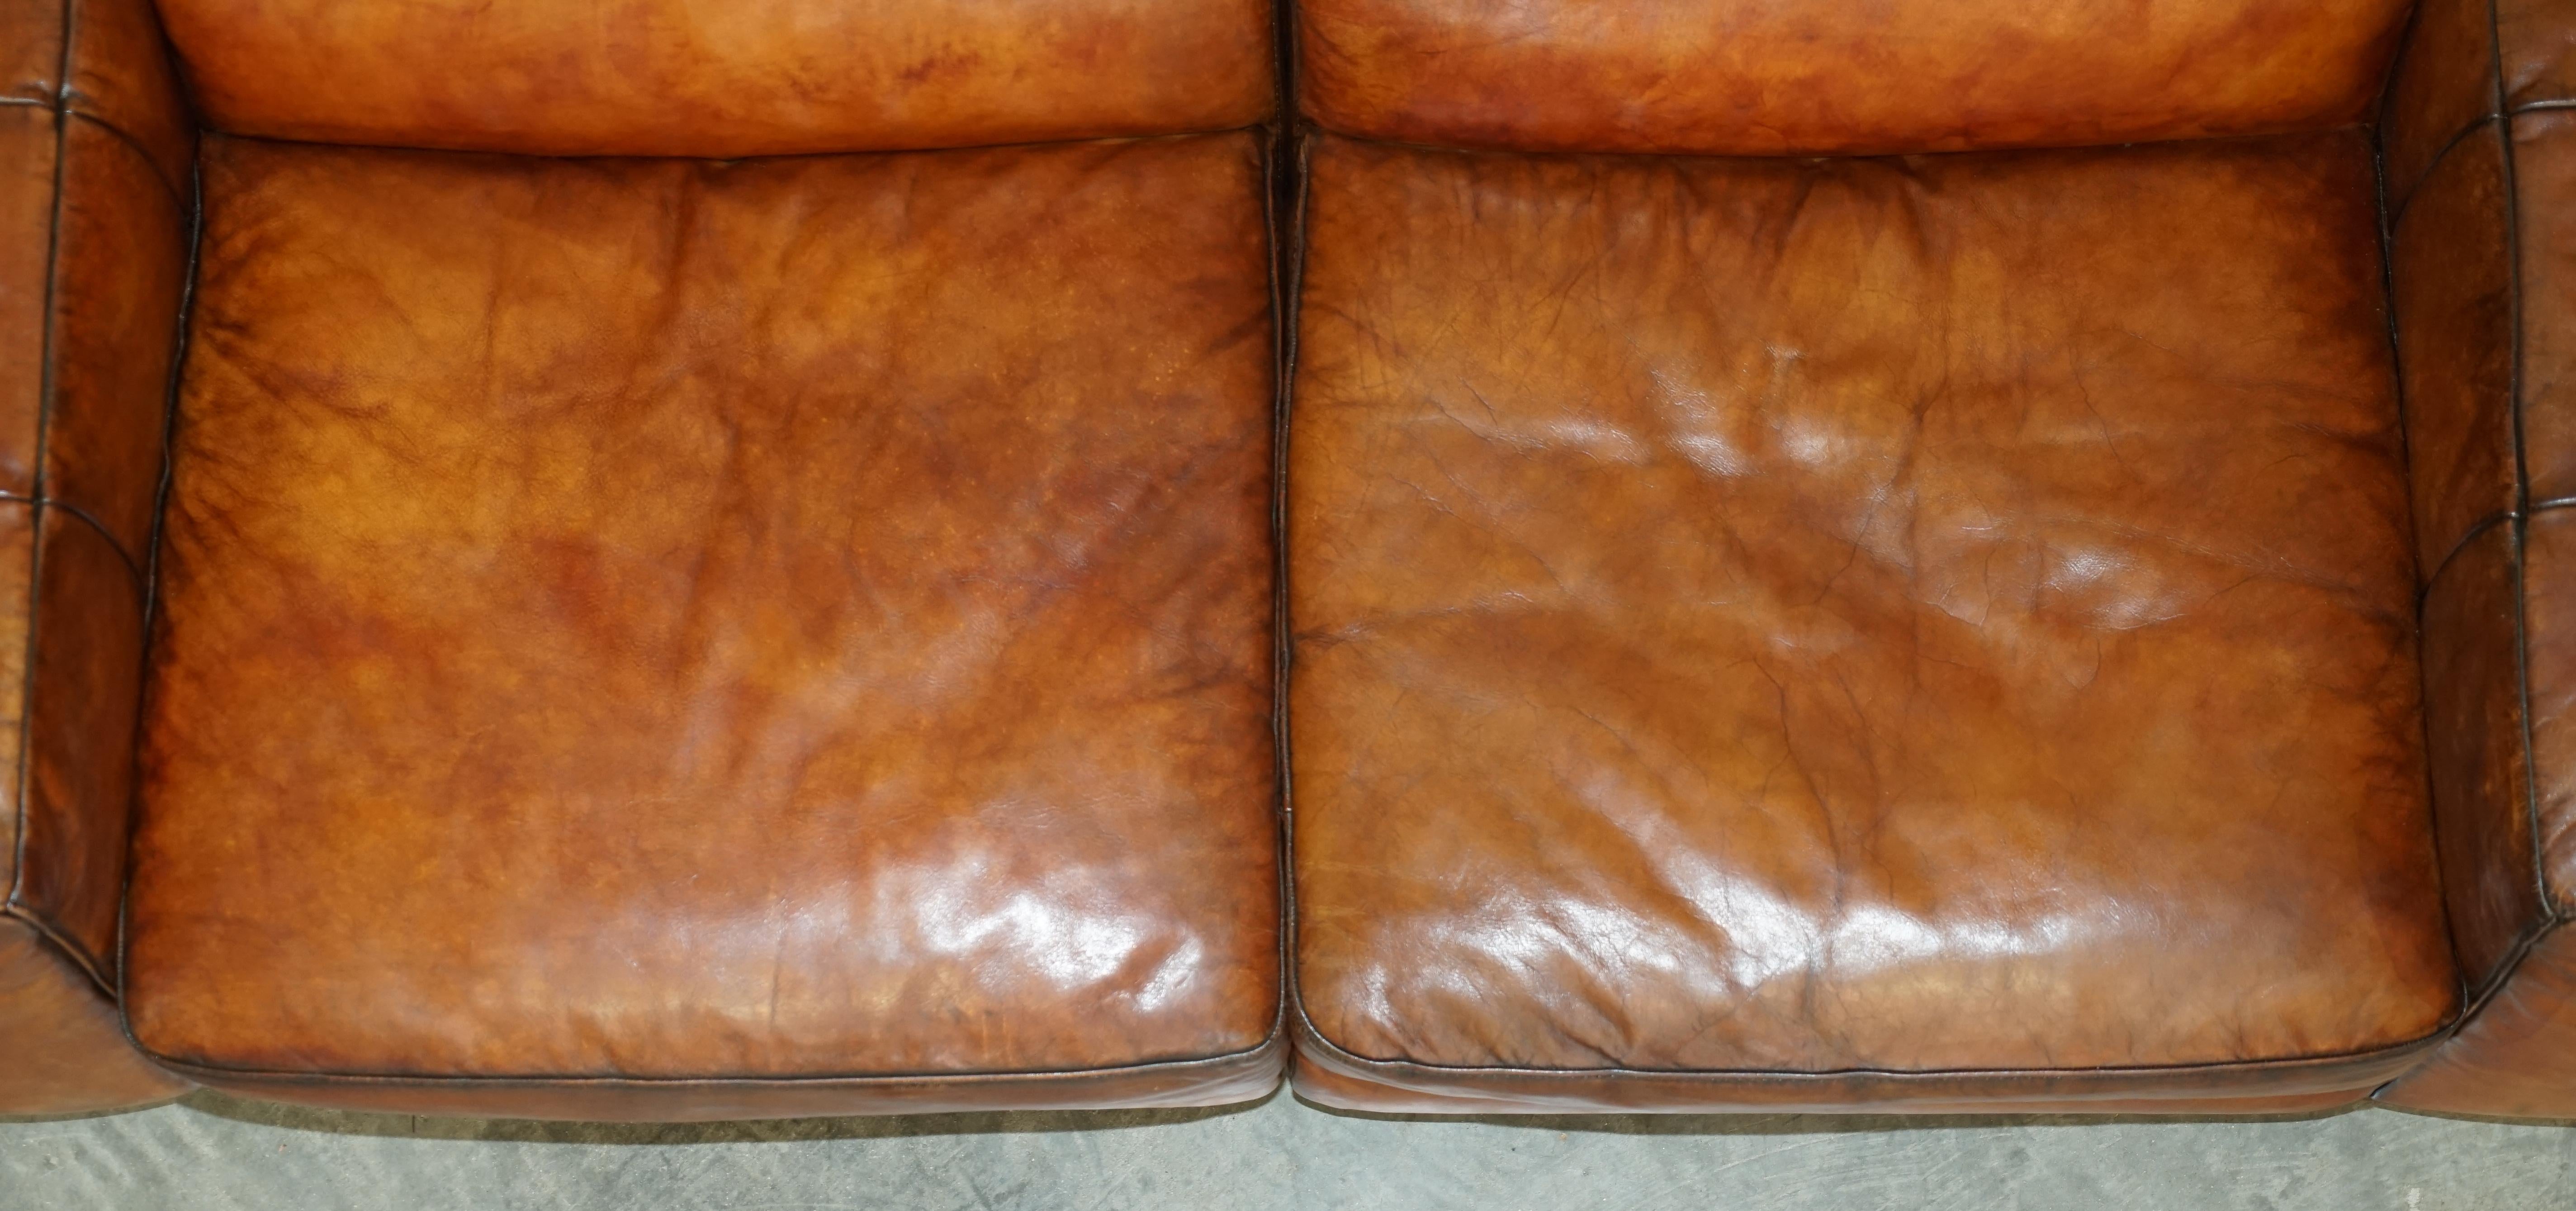 Natuzzi Roma Hand Dyed Cigar Brown Leather Sofa Raising Headrest Part of a Suite For Sale 6